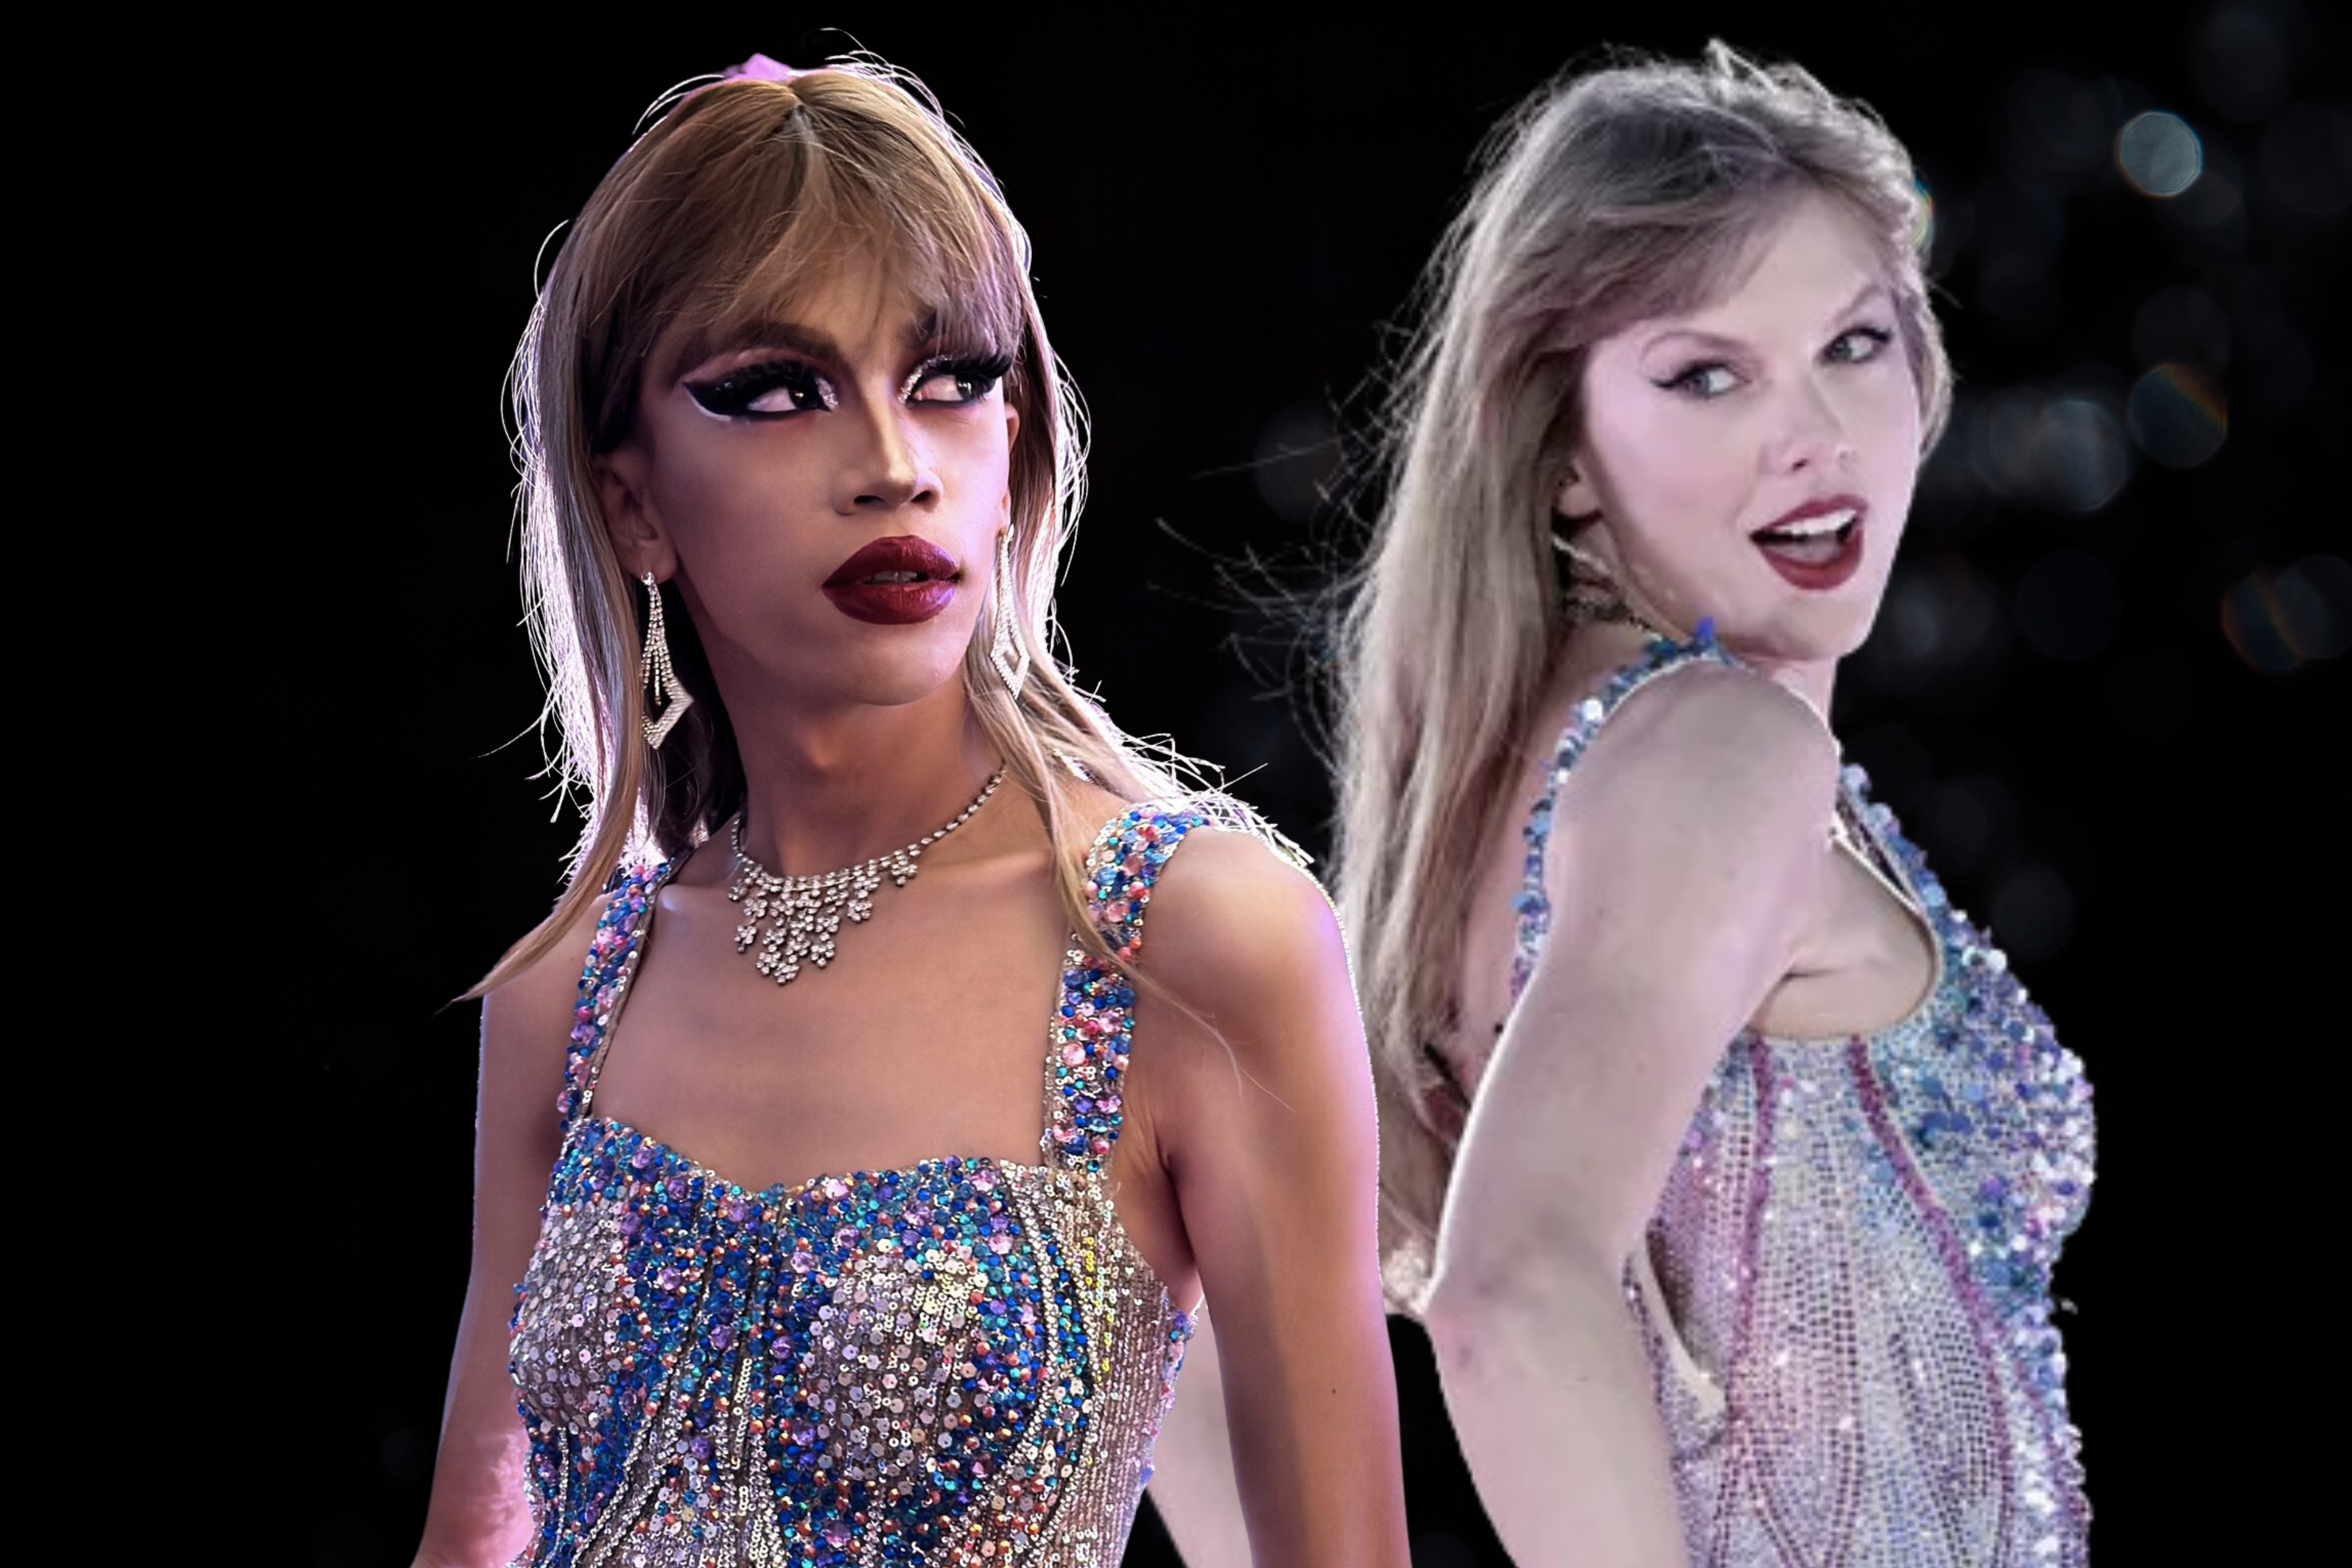 Dress Like Taylor Swift: “You Belong With Me” Music Video (May 2